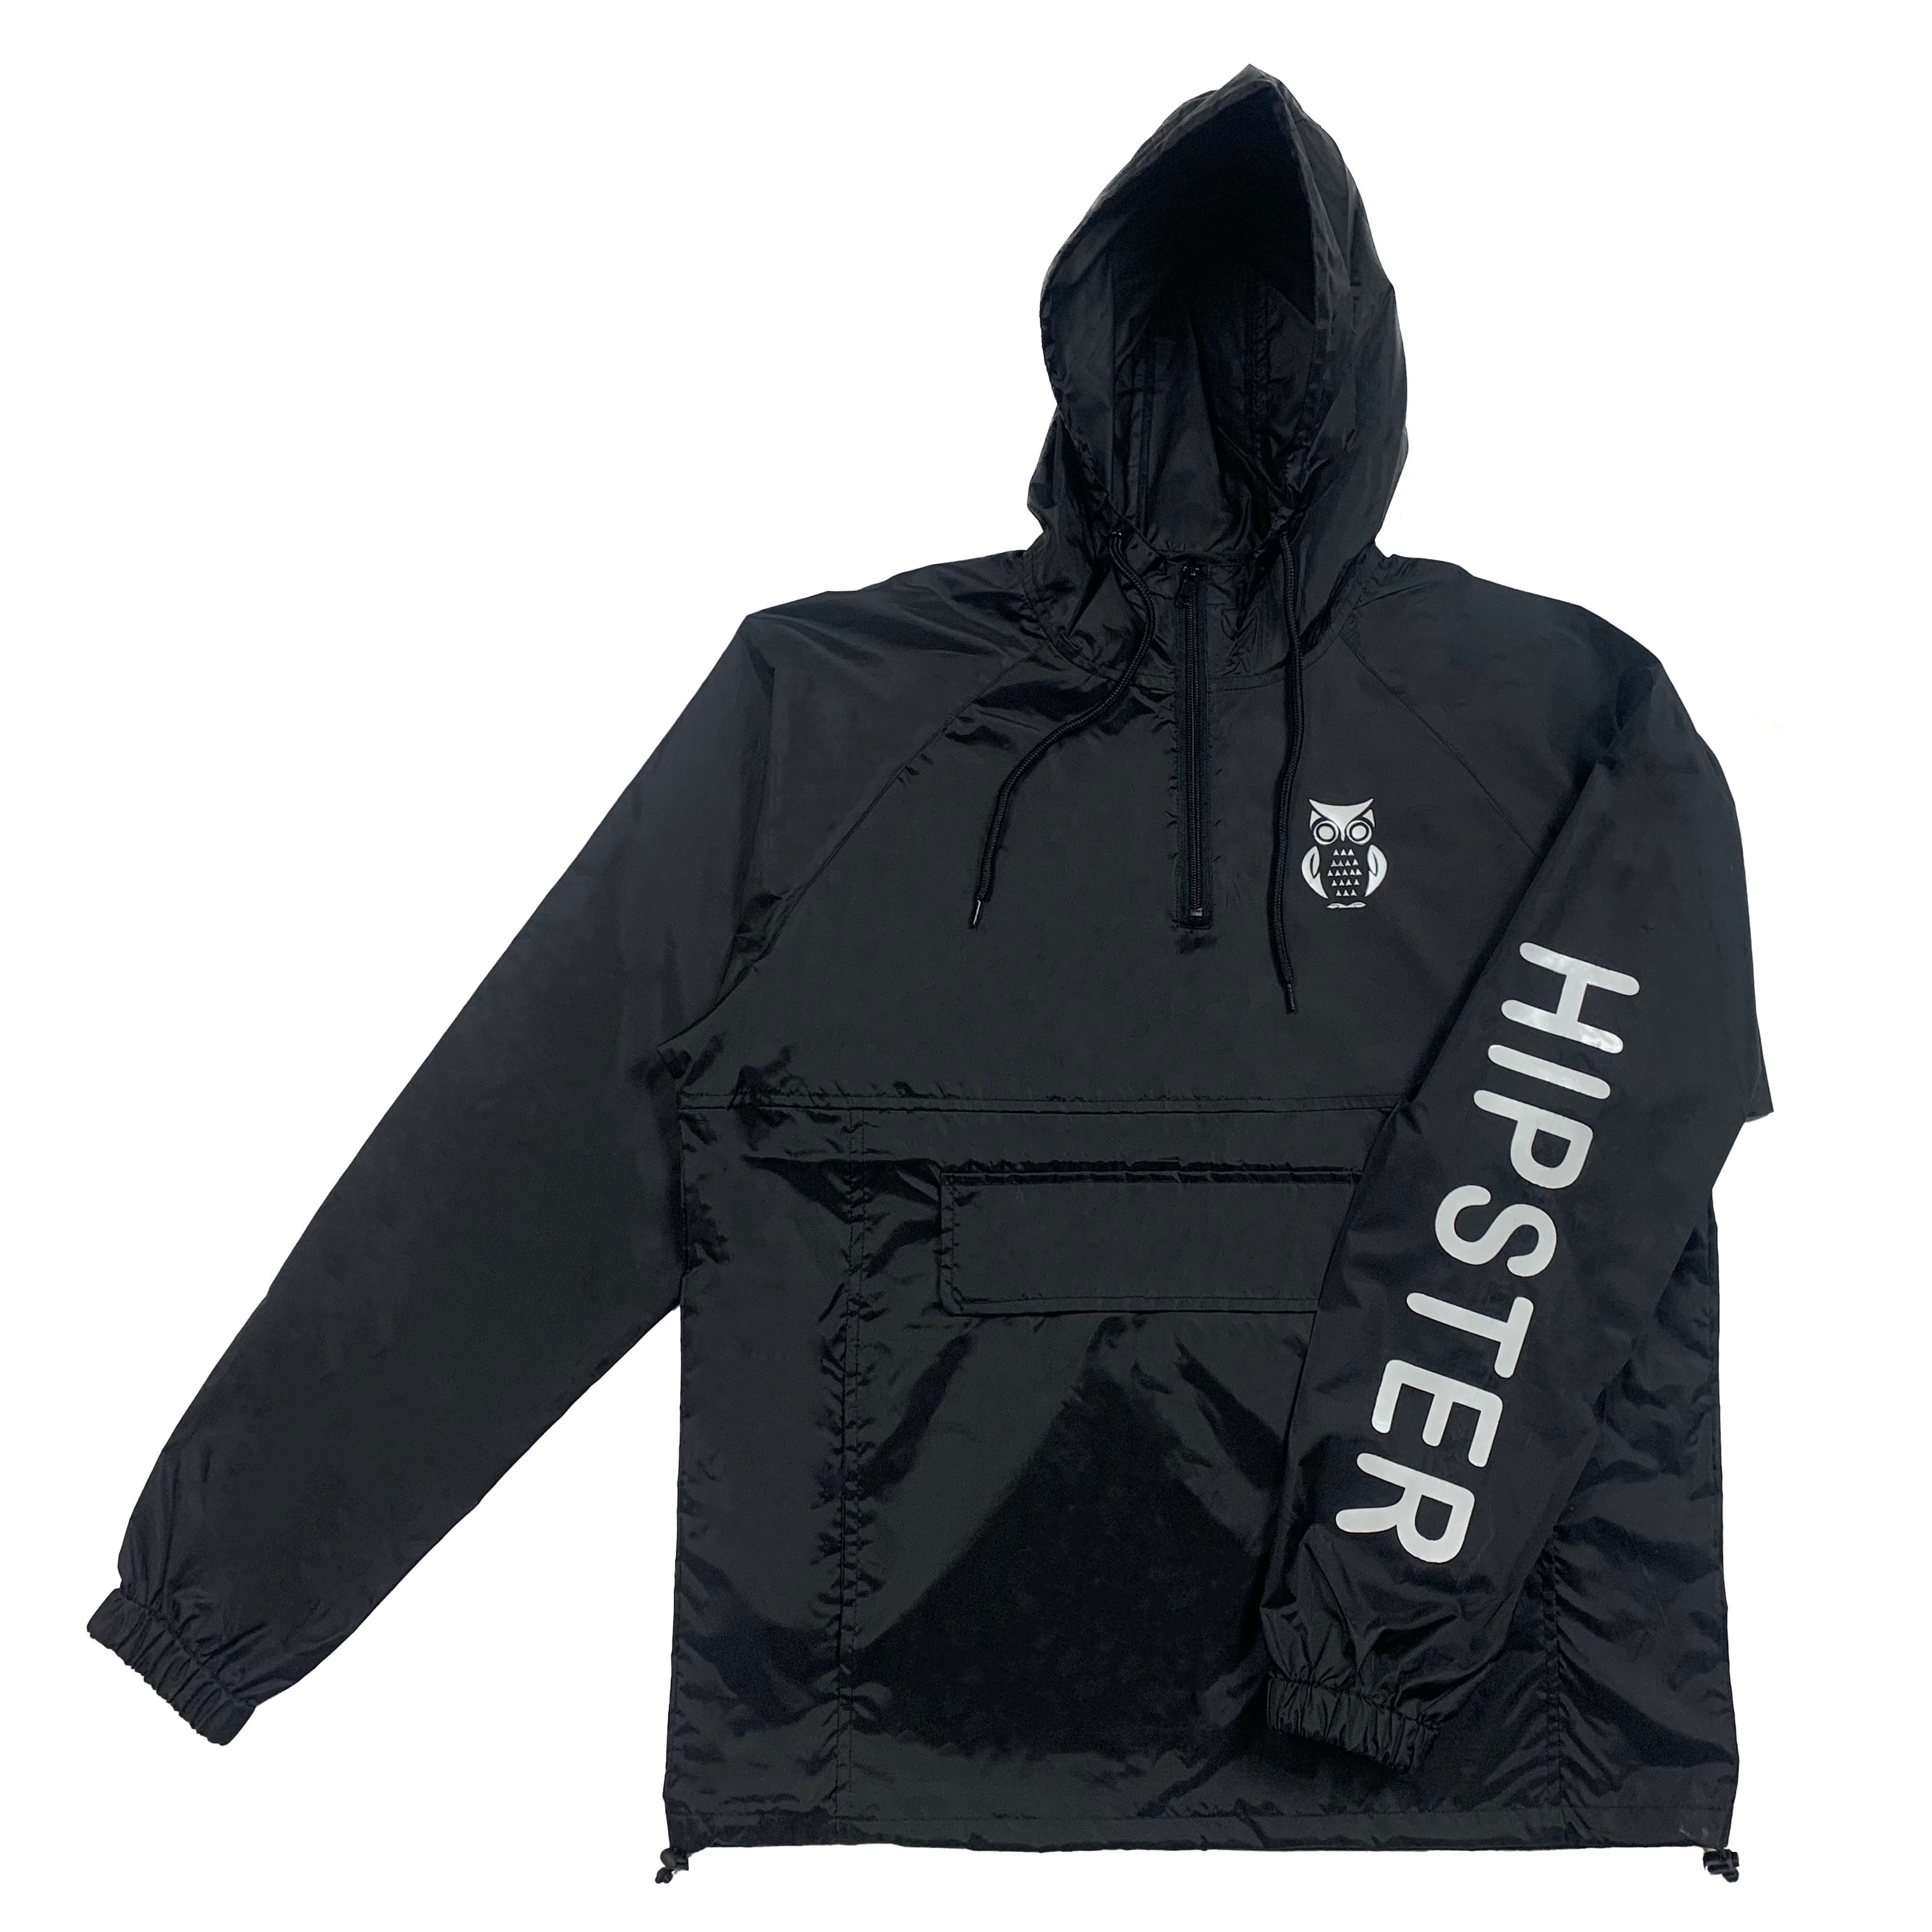 Windbreaker with Hipster Logo and Print - Black